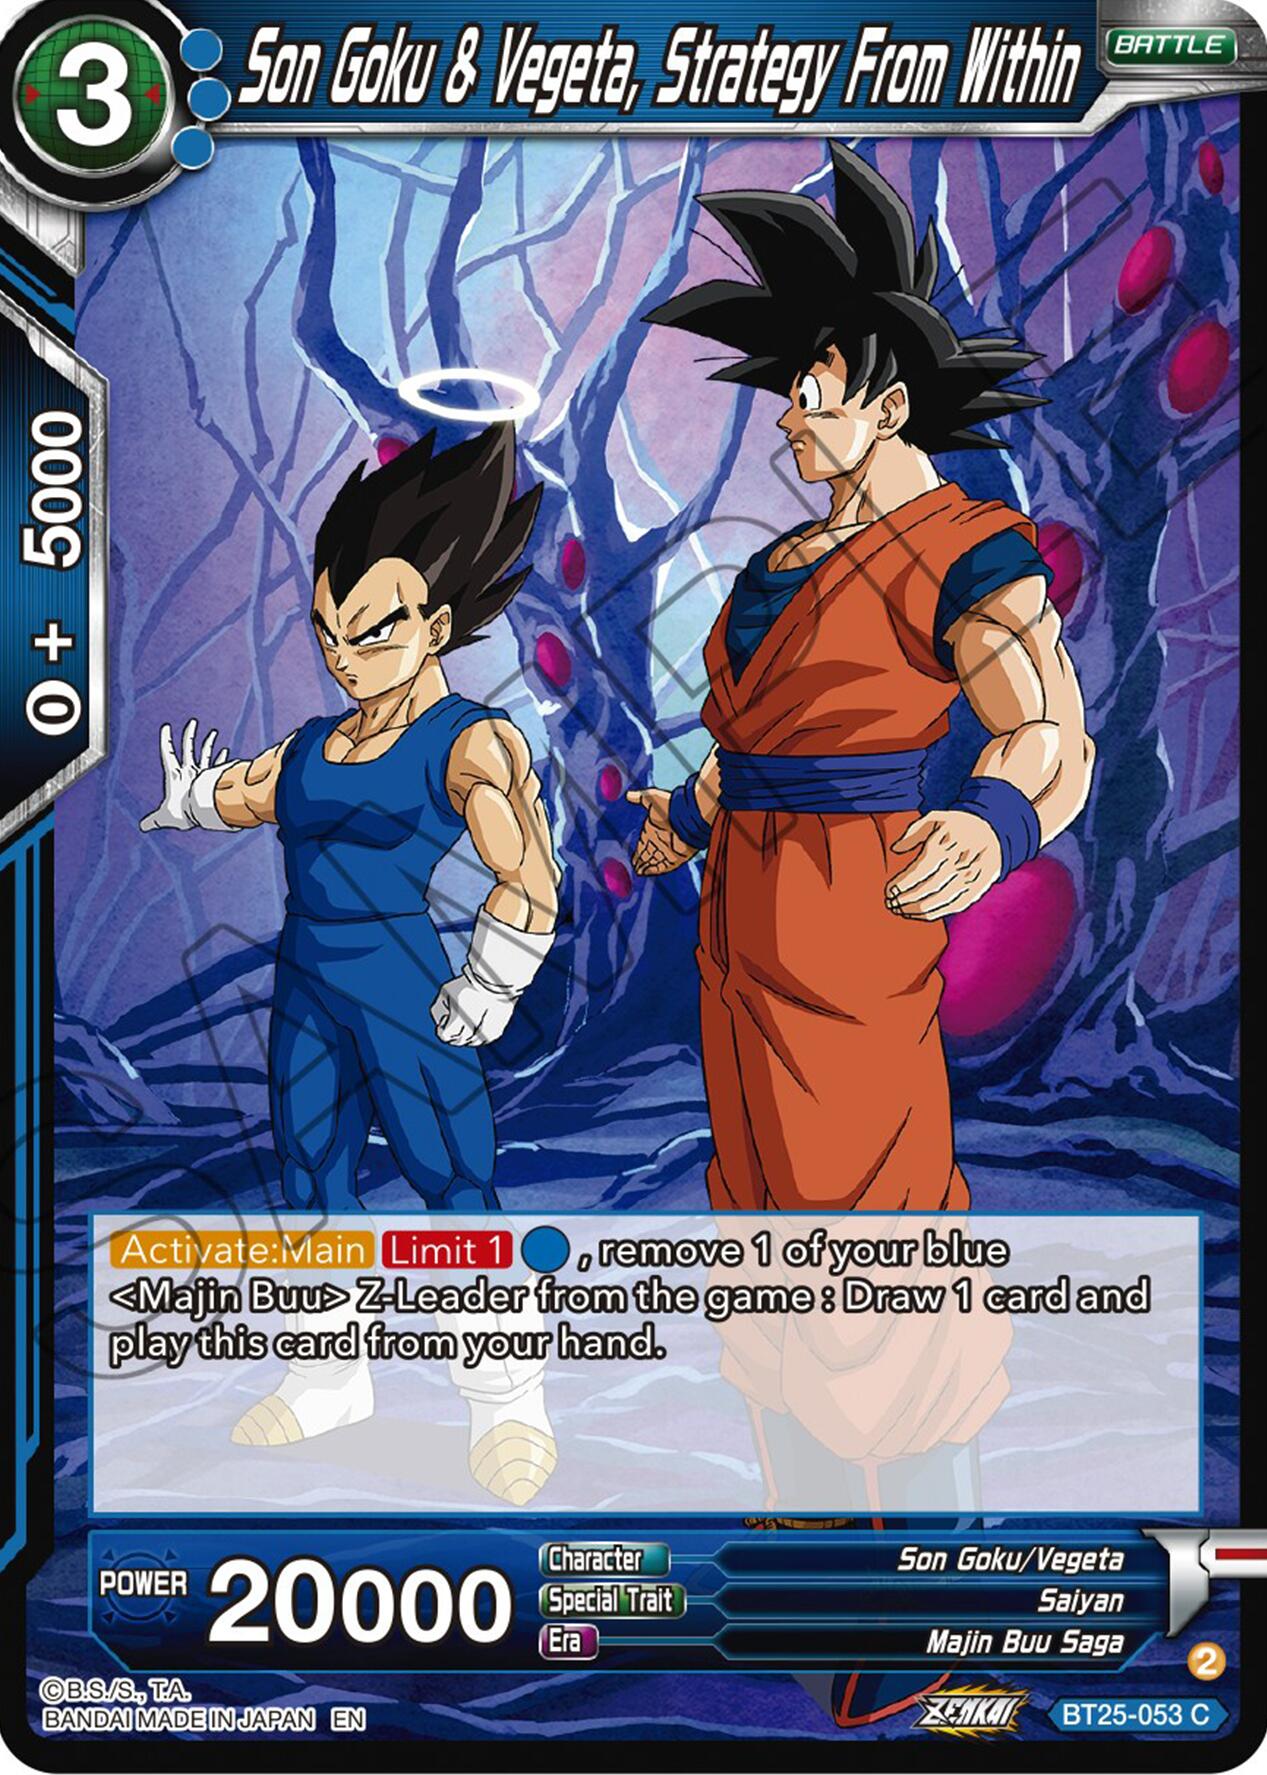 Son Goku & Vegeta, Strategy From Within (BT25-053) [Legend of the Dragon Balls] | Sanctuary Gaming